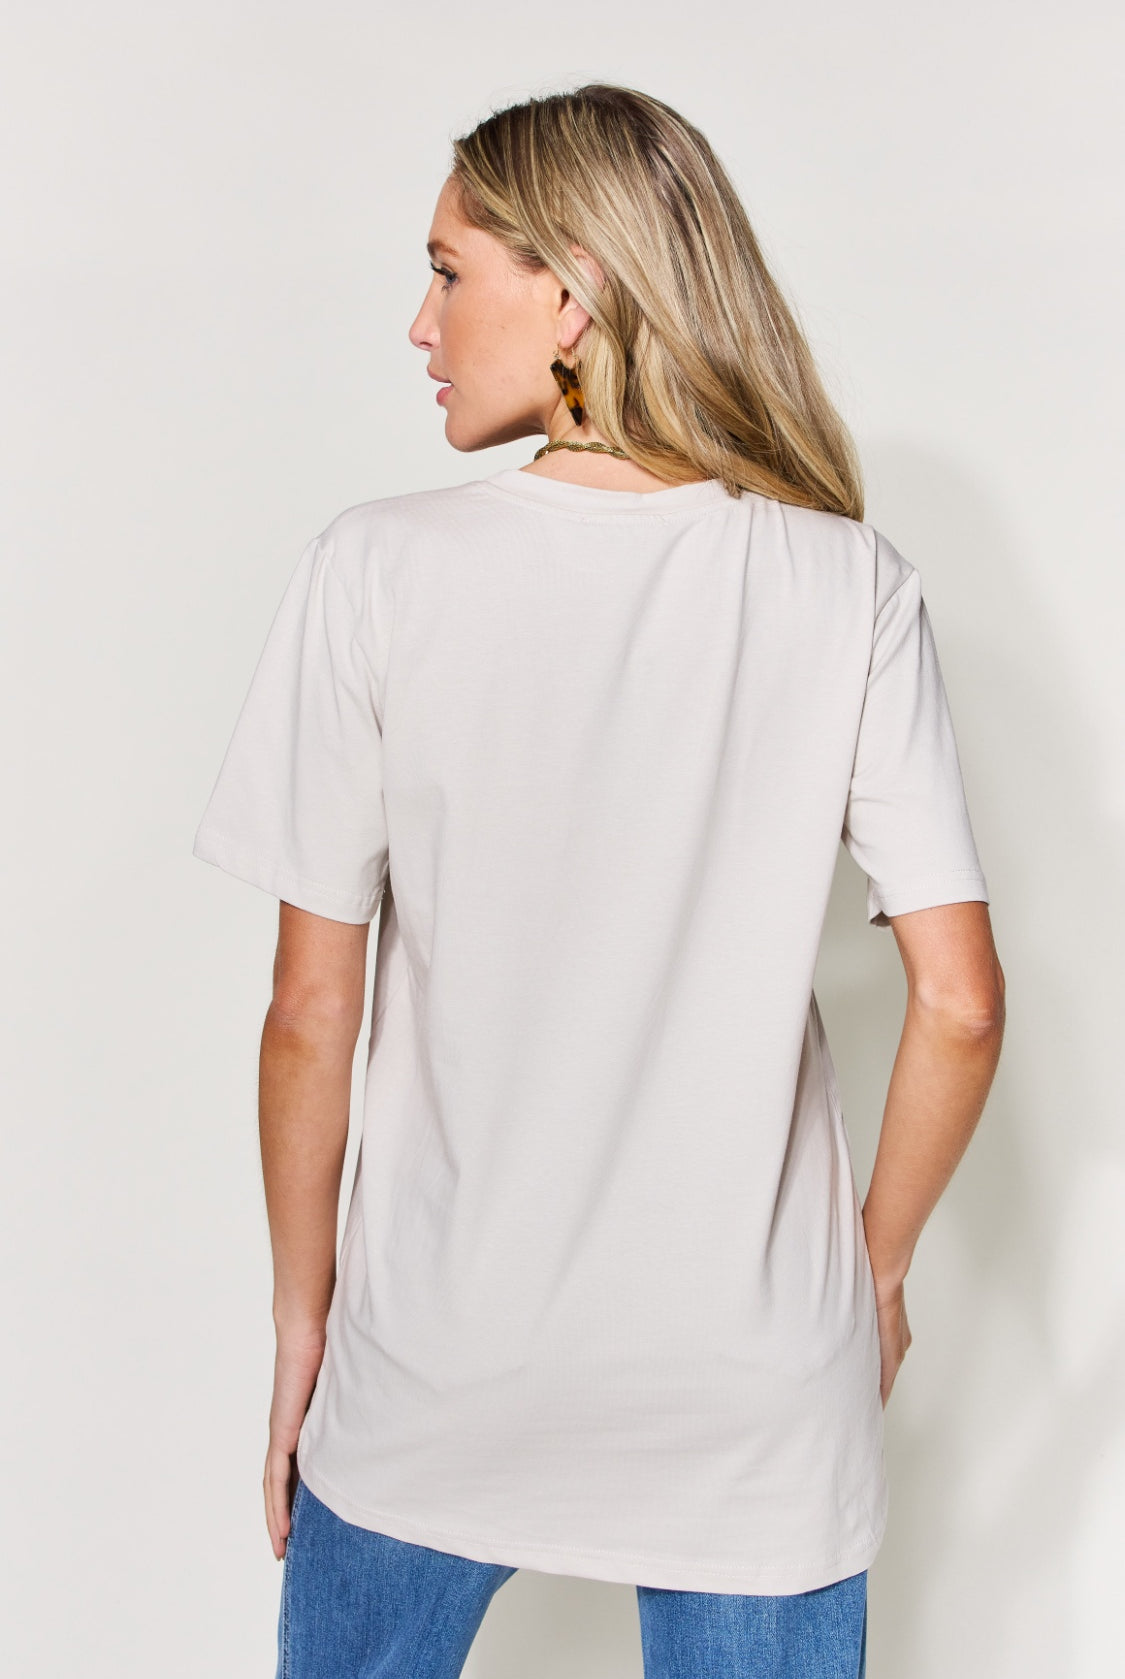 Light Gray Simply Love Full Size Graphic Round Neck Short Sleeve T-Shirt